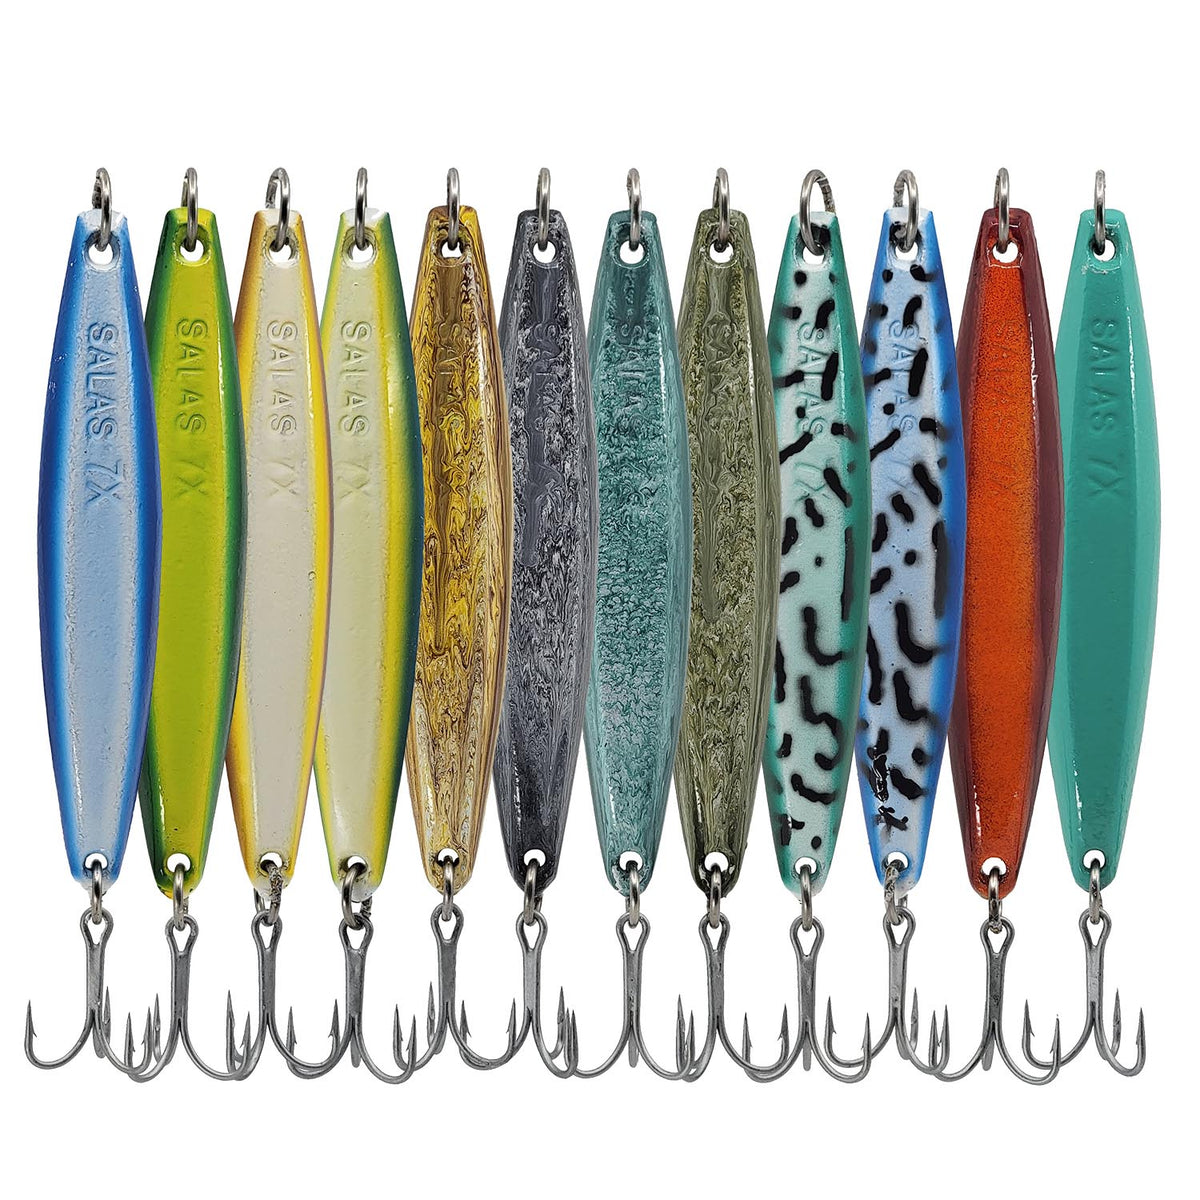 Topwater Tins: What's A Surface Iron? - The Fisherman